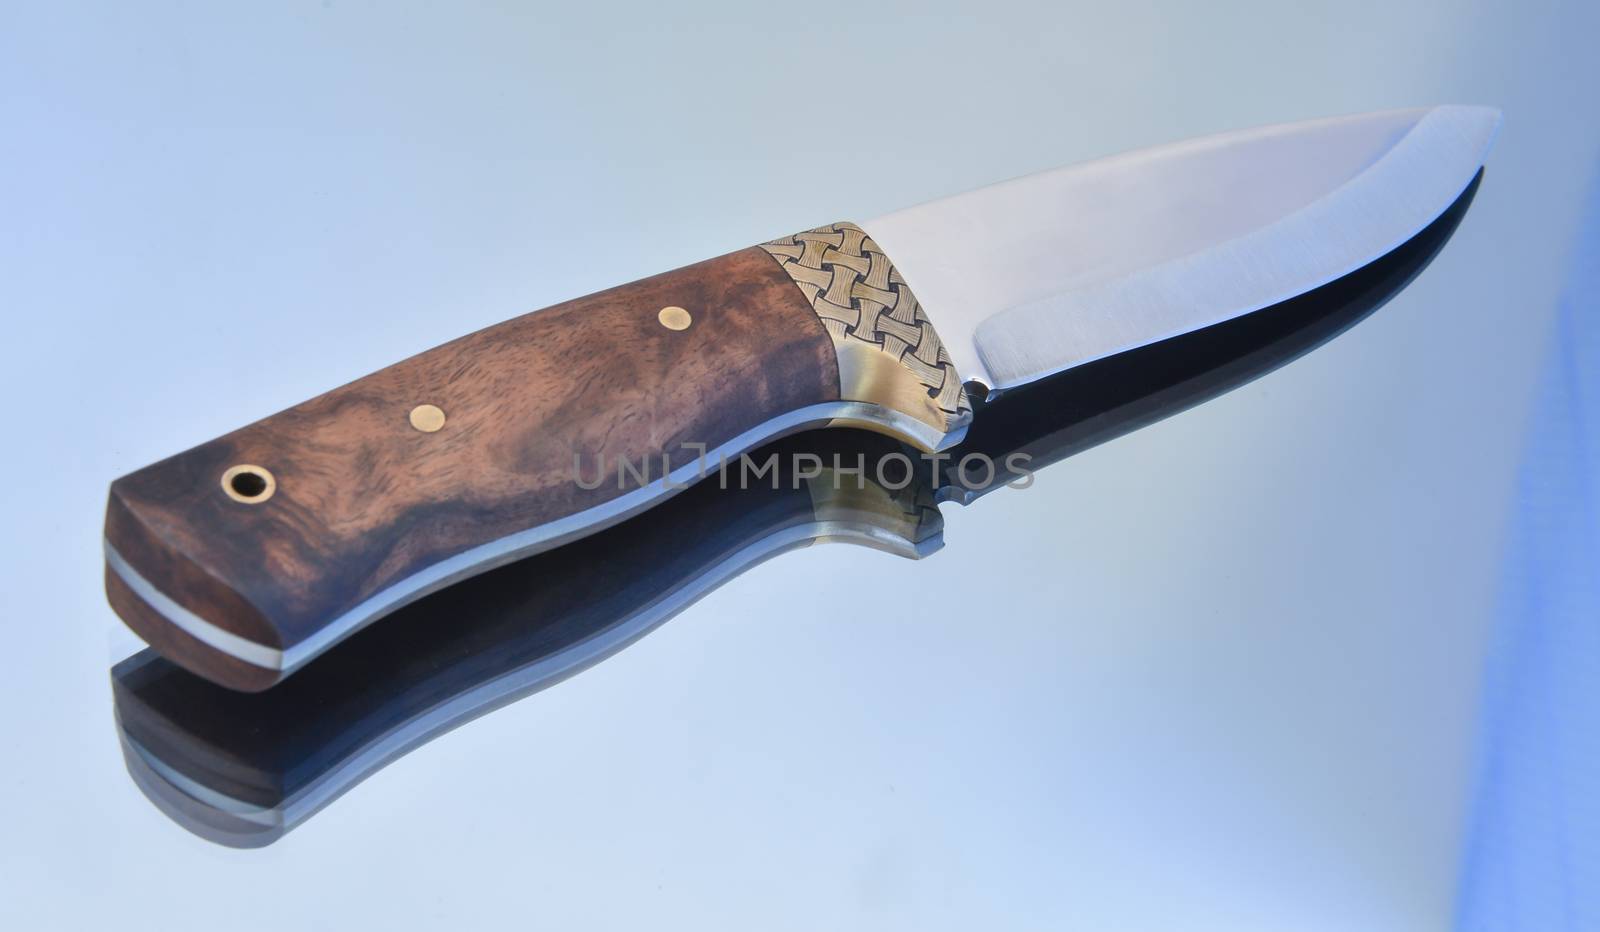 required for hunting and camping-quality knife by crazymedia007